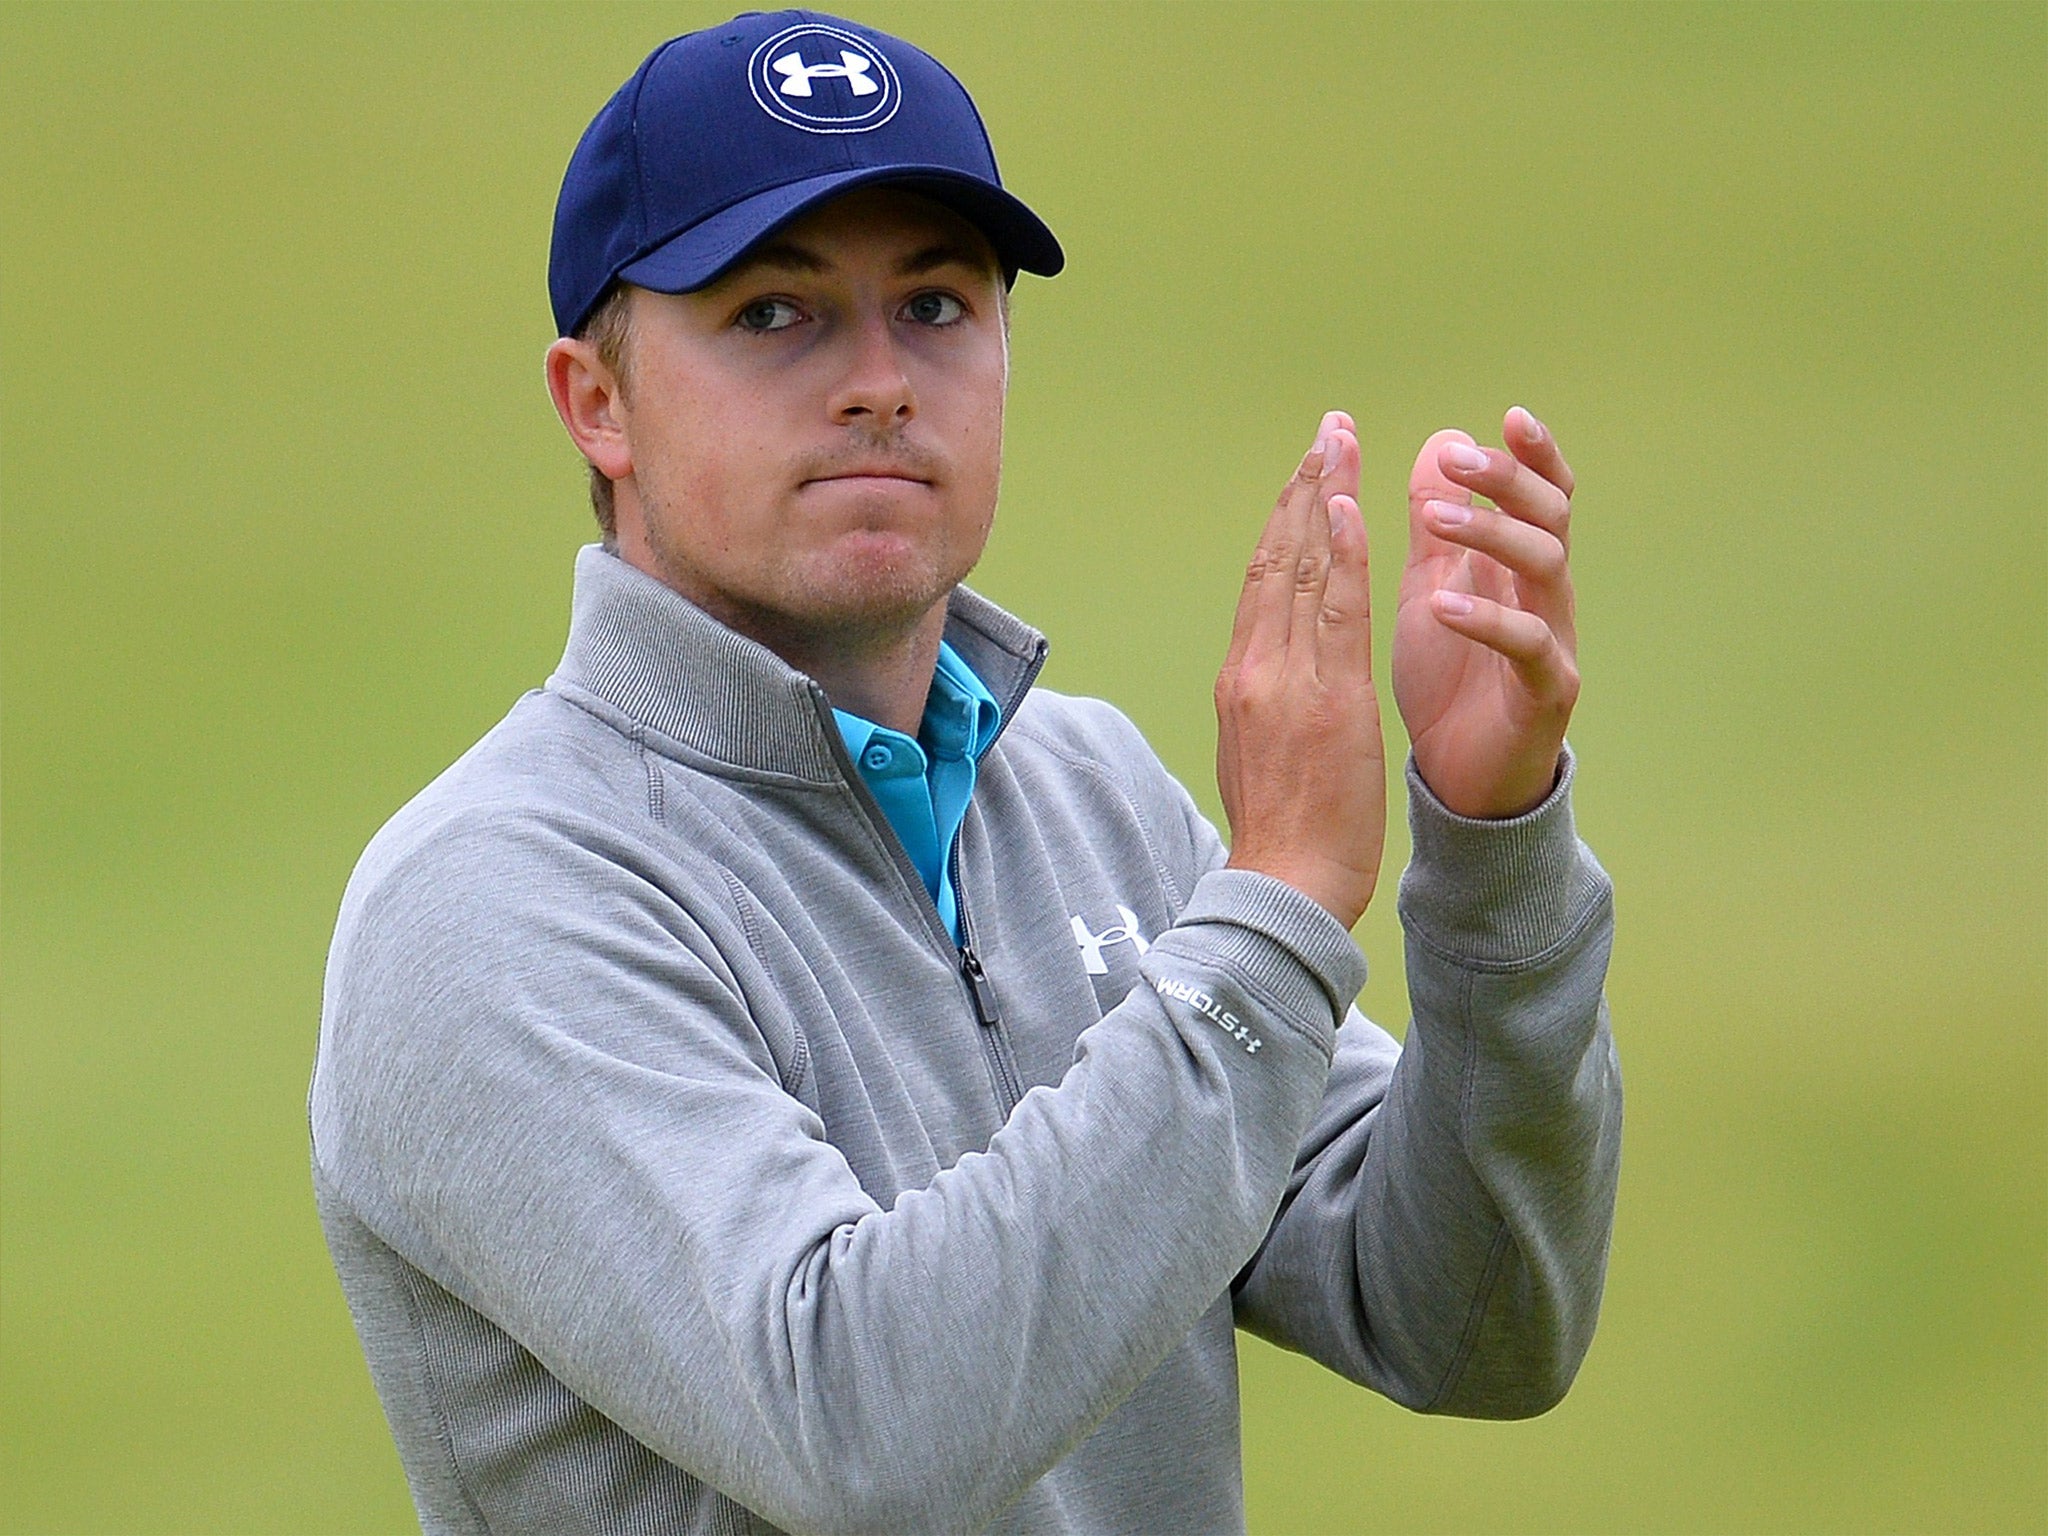 Jordan Spieth finished in joint fourth place